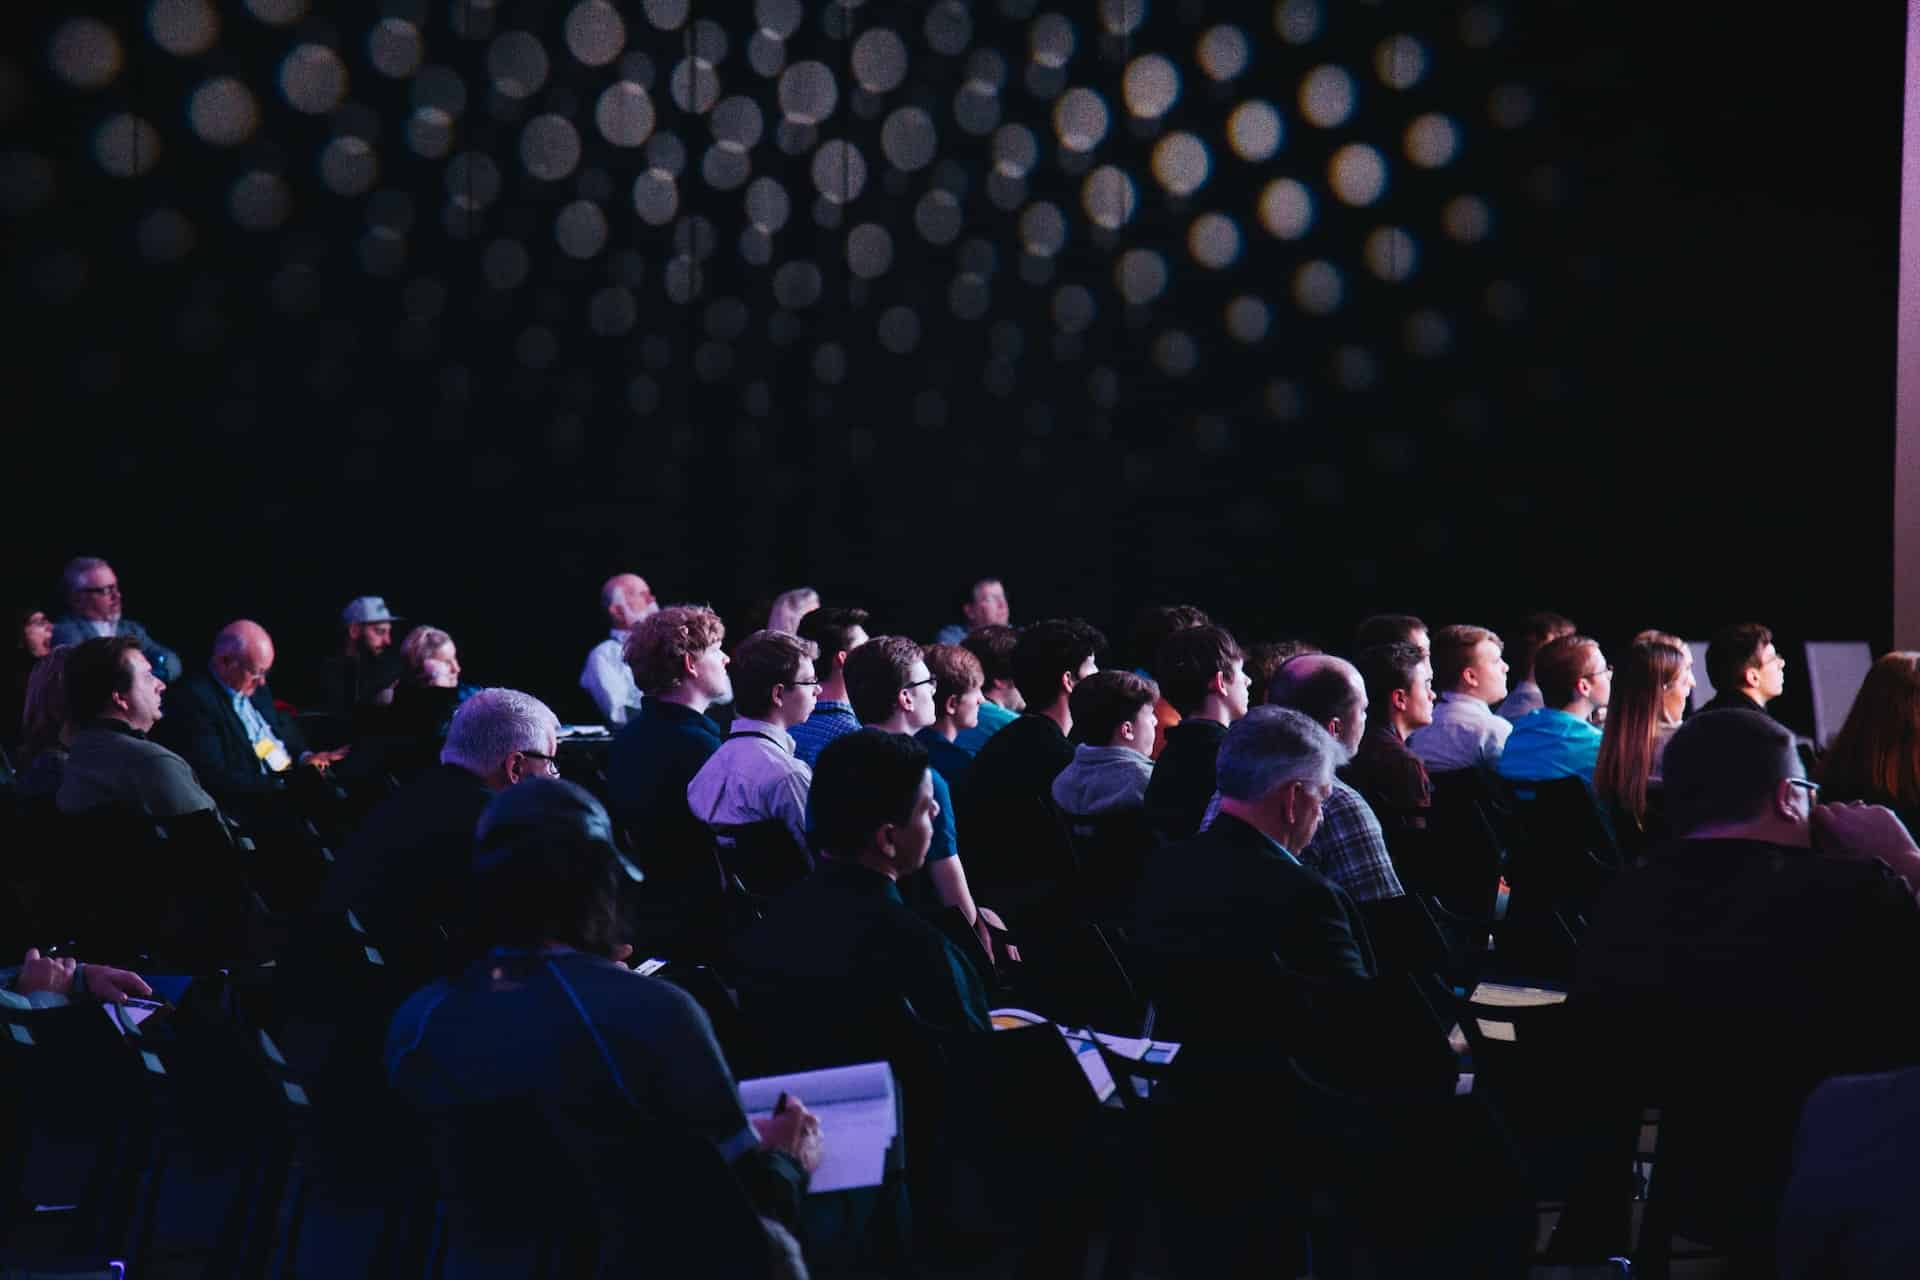  Image Title: Mumbrella360 Image Description: An engaged crowd at a marketing conference Alt Text: Media and marketing industry Source: https://unsplash.com/photos/crowd-of-people-sitting-on-chairs-inside-room-F2KRf_QfCqw